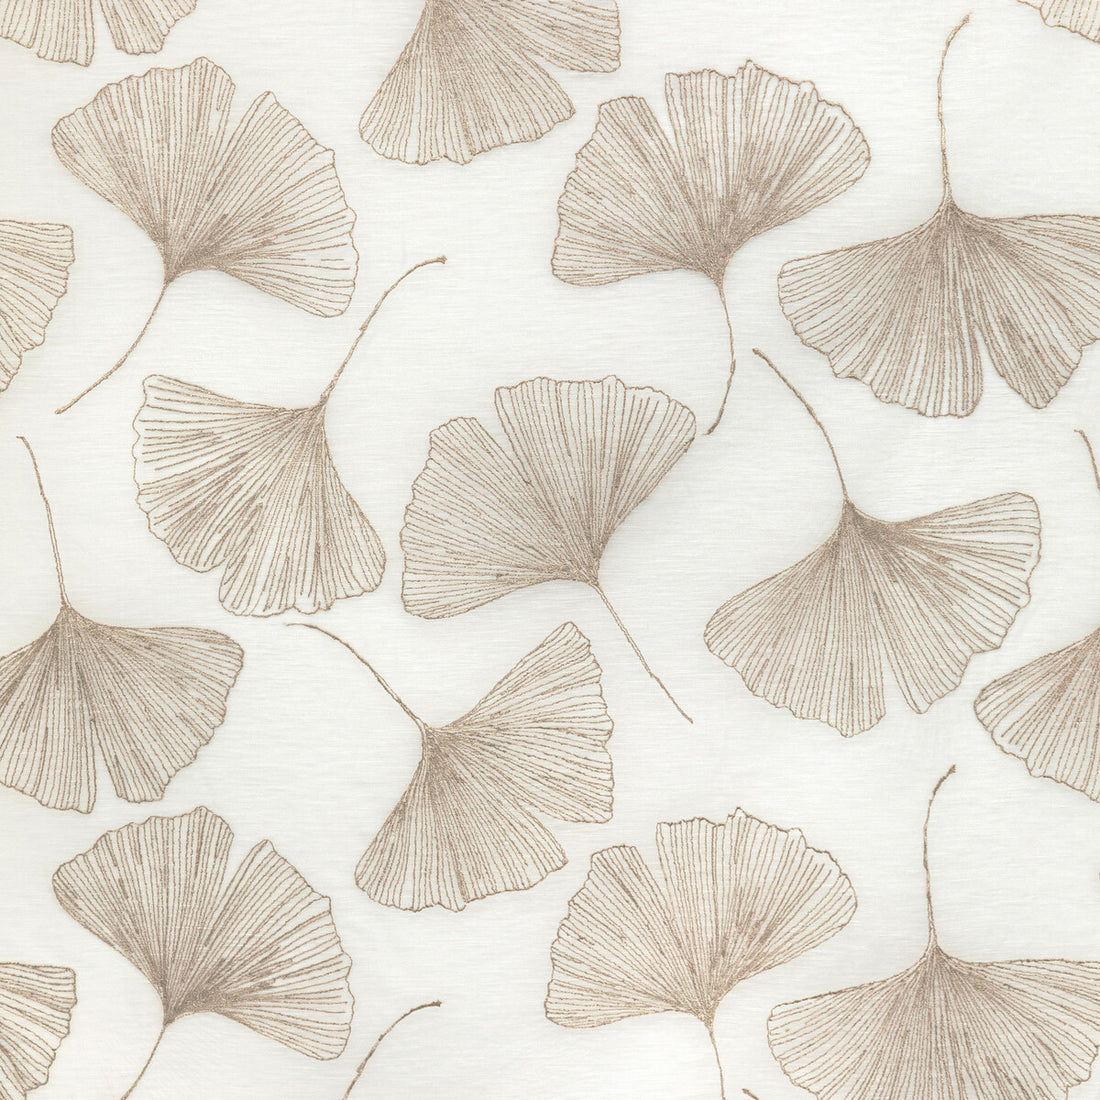 Gingko Leaf fabric in gold color - pattern 4949.416.0 - by Kravet Couture in the Modern Luxe Silk Luster collection